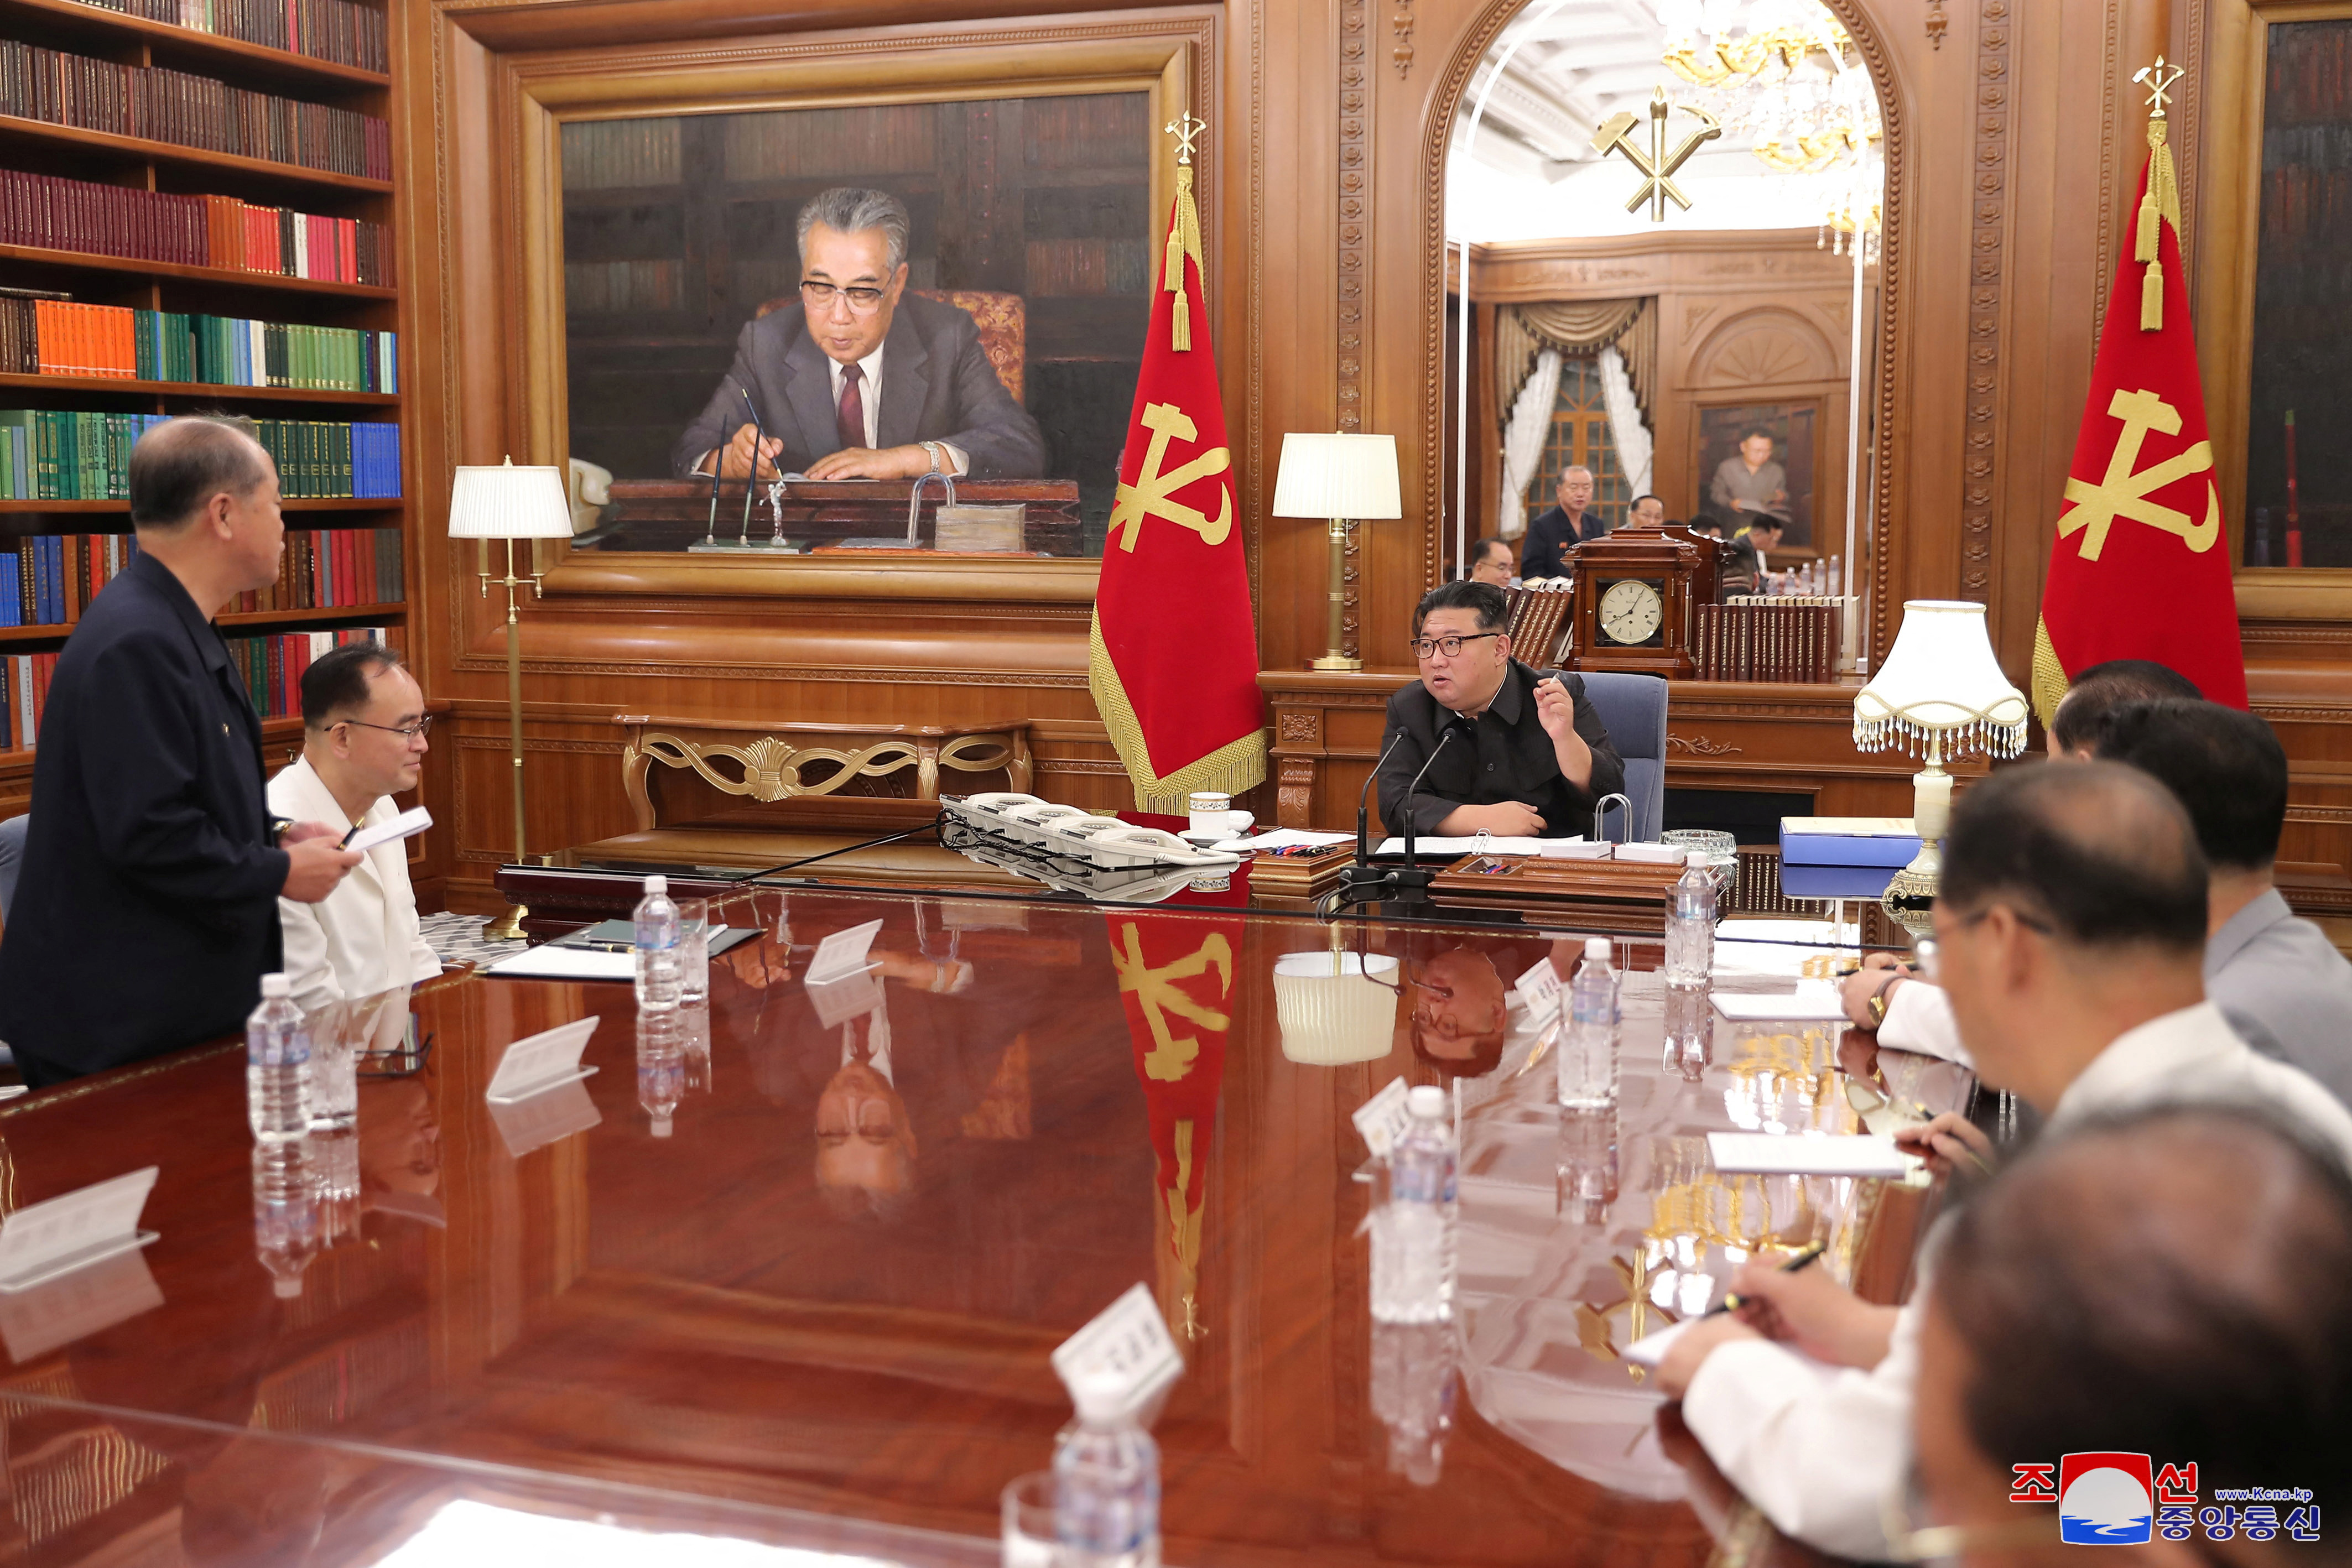 North Korean leader Kim Jong Un presides over the enlarged meeting of the Secretariat of the Central Committee of the Workers' Party of Korea in Pyongyang